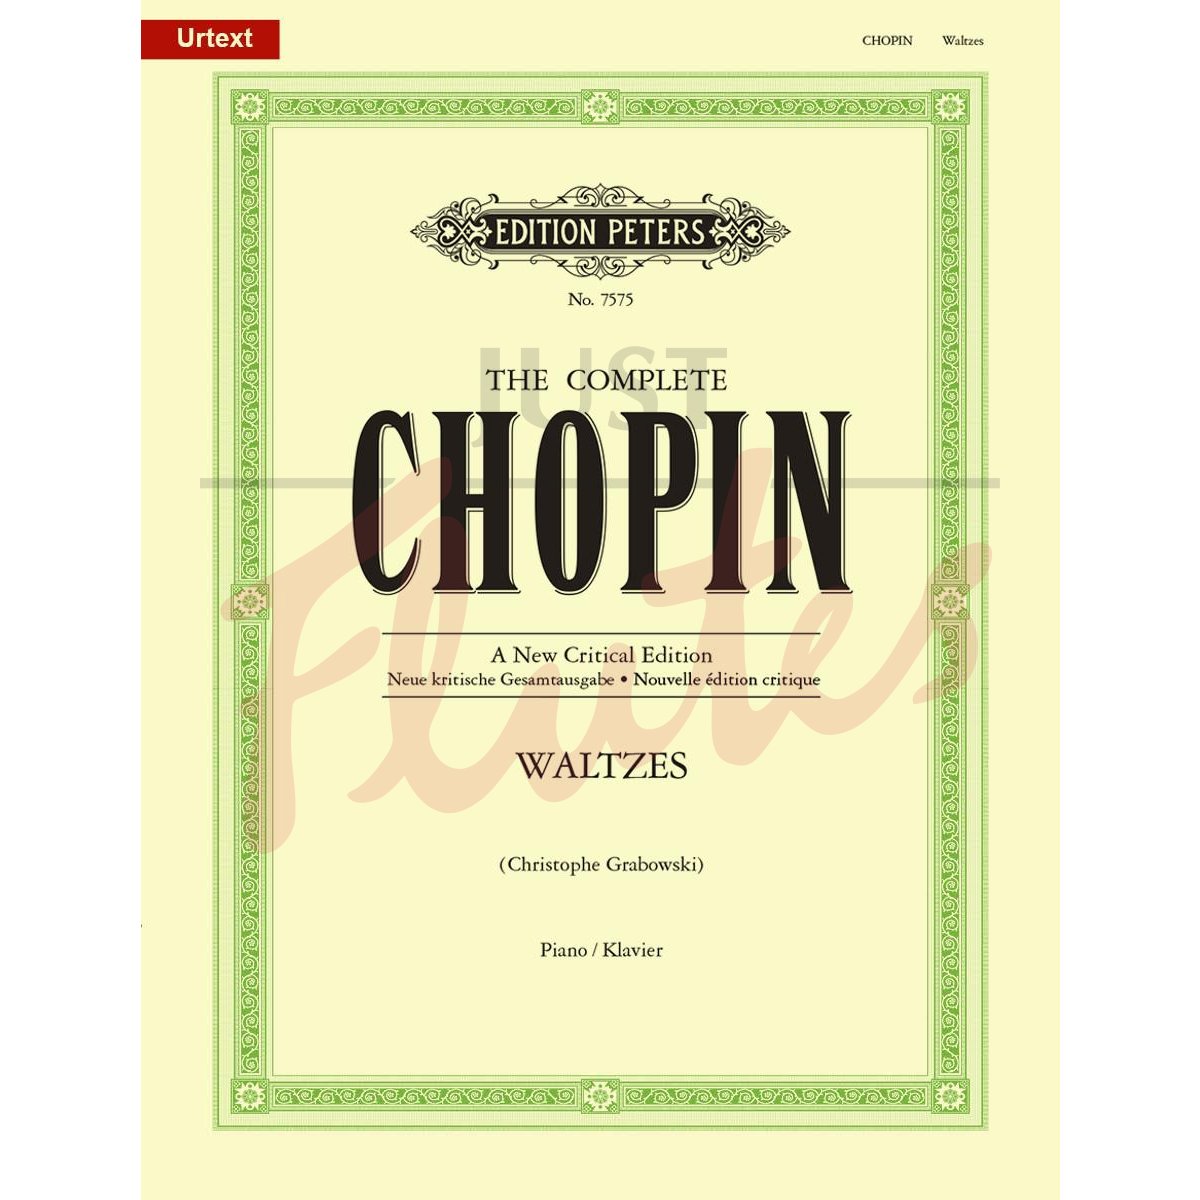 Complete Waltzes for Piano